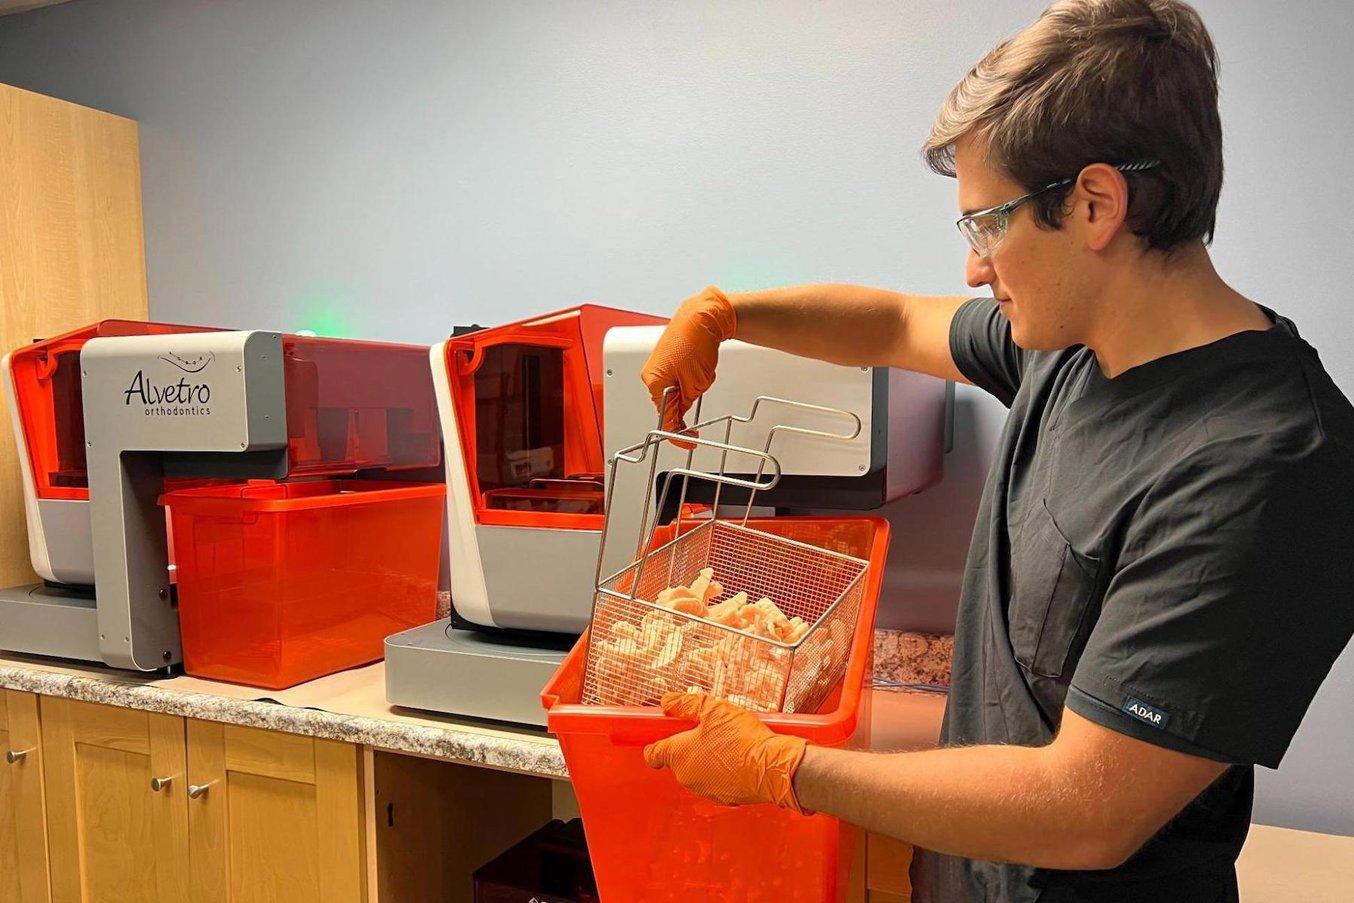 Person pulling a basket of 3D printed models from a bin next to Form 3B+ printers and Form Auto